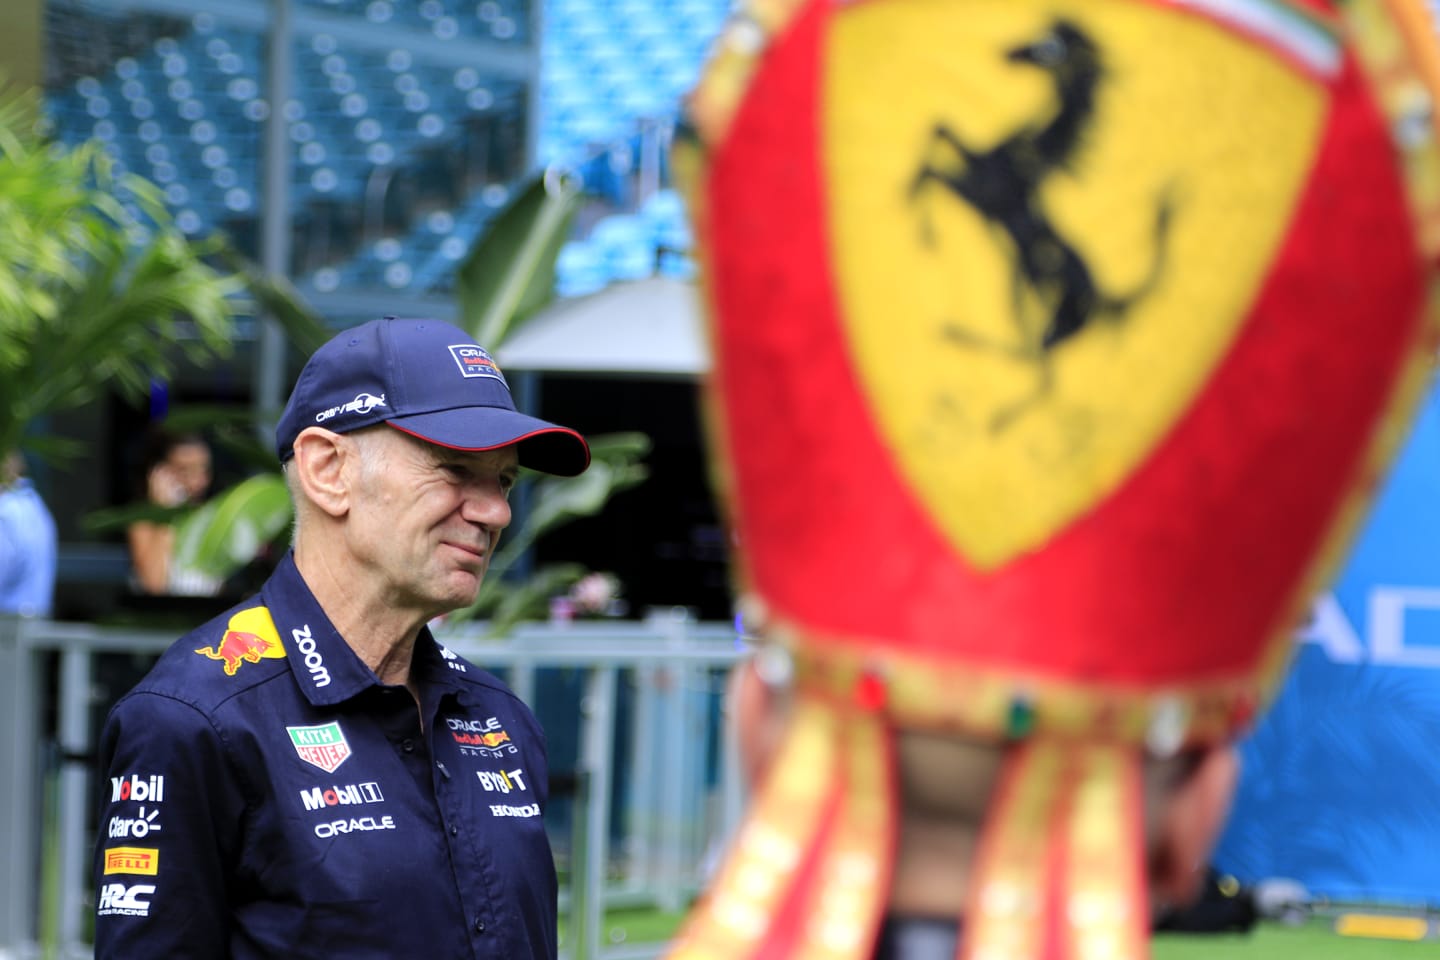 MIAMI GARDENS, FL - MAY 04: Oracle Red Bull Racing chief technical officer Adrian Newey talks with